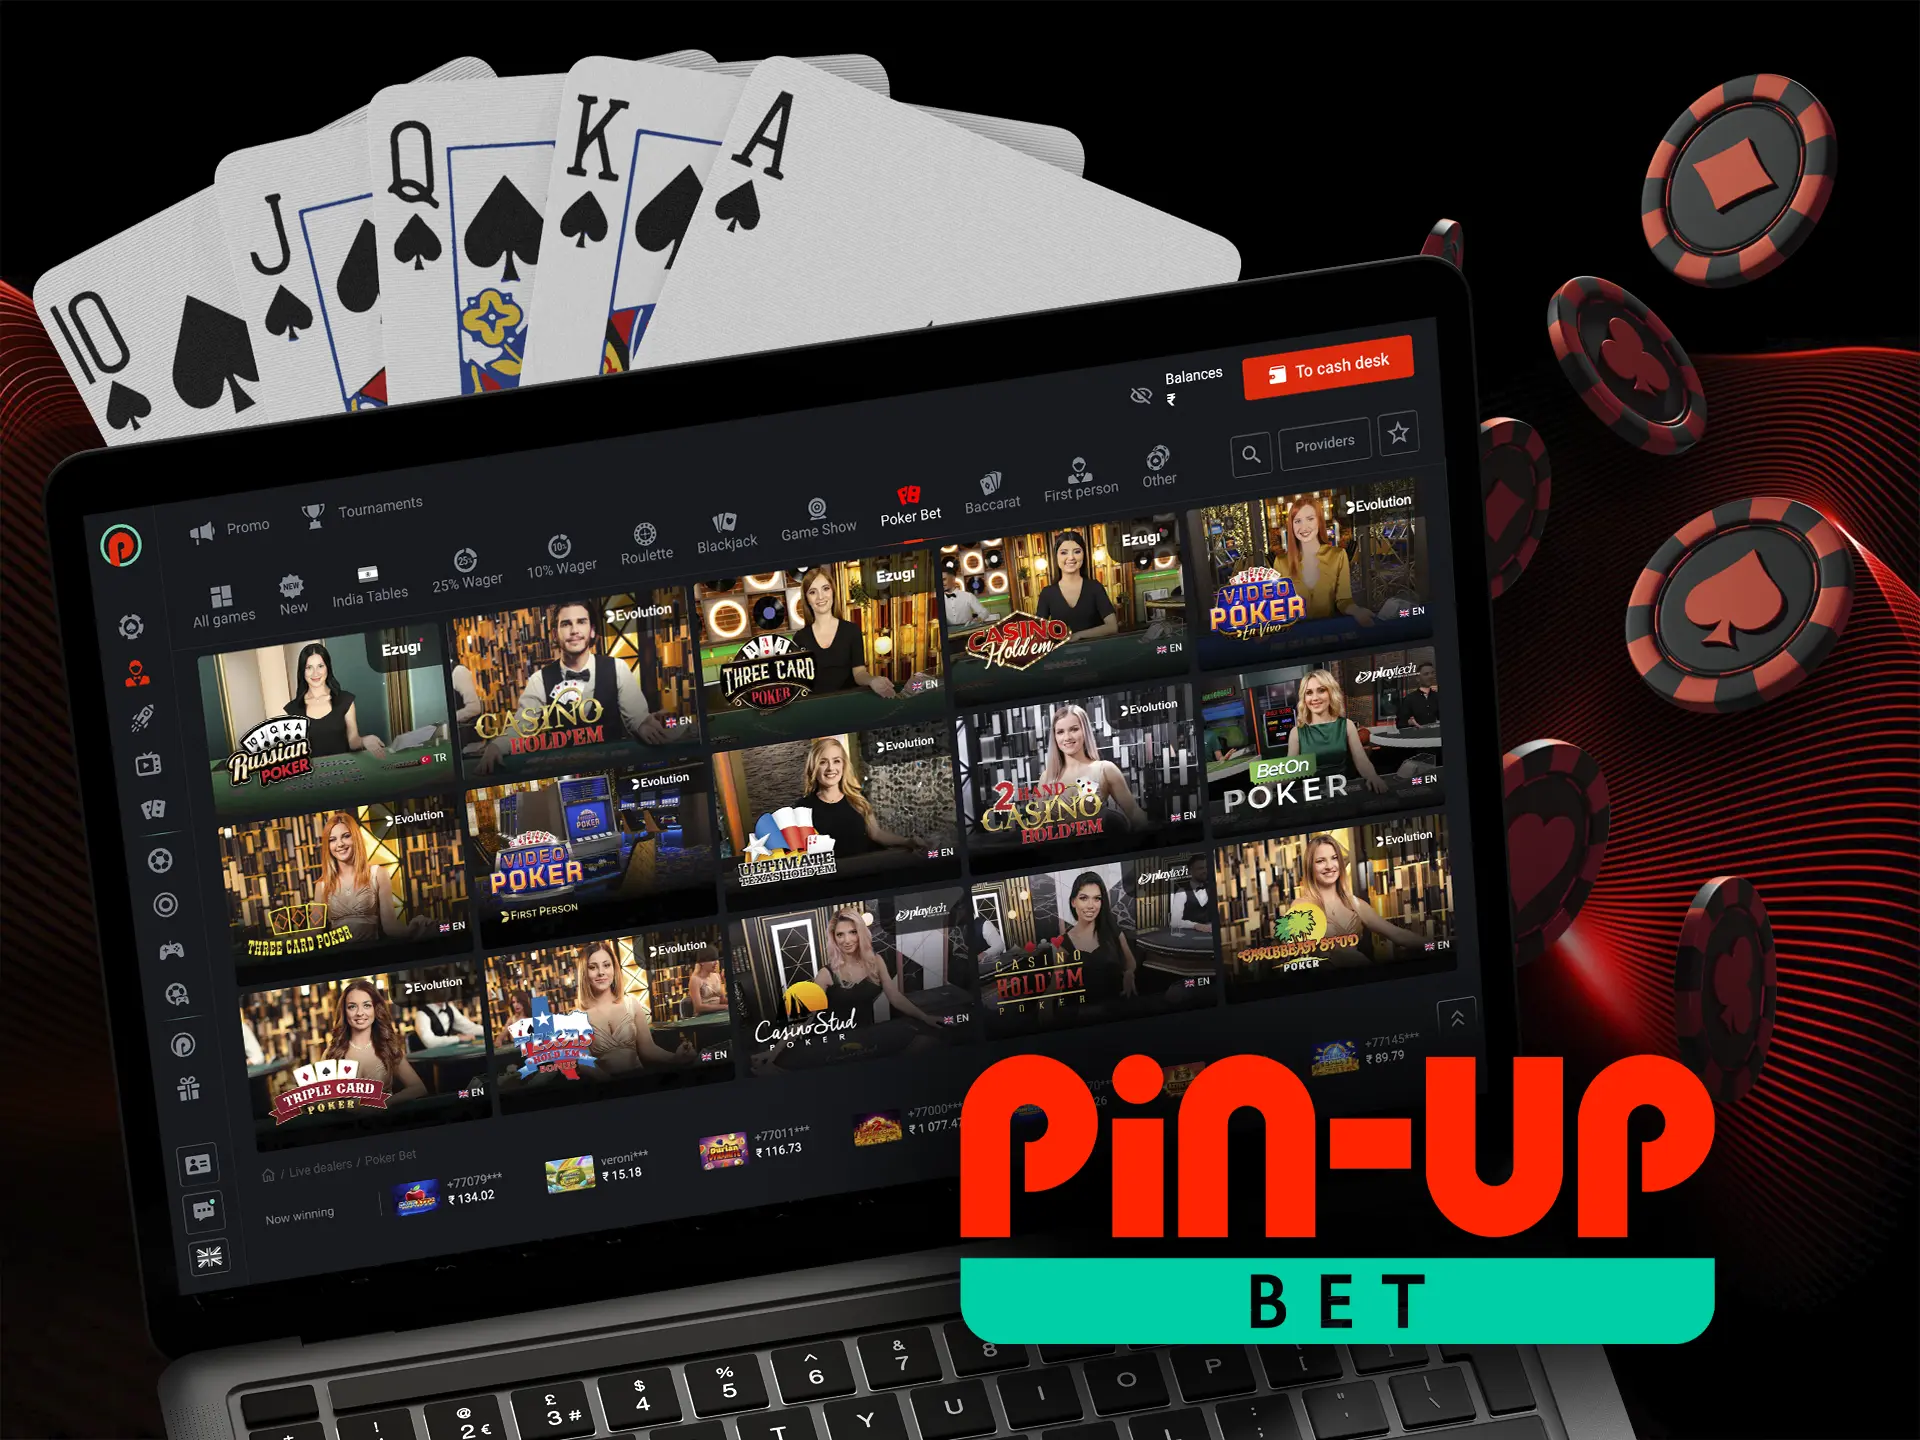 You can play poker games in the Pin Up casino.